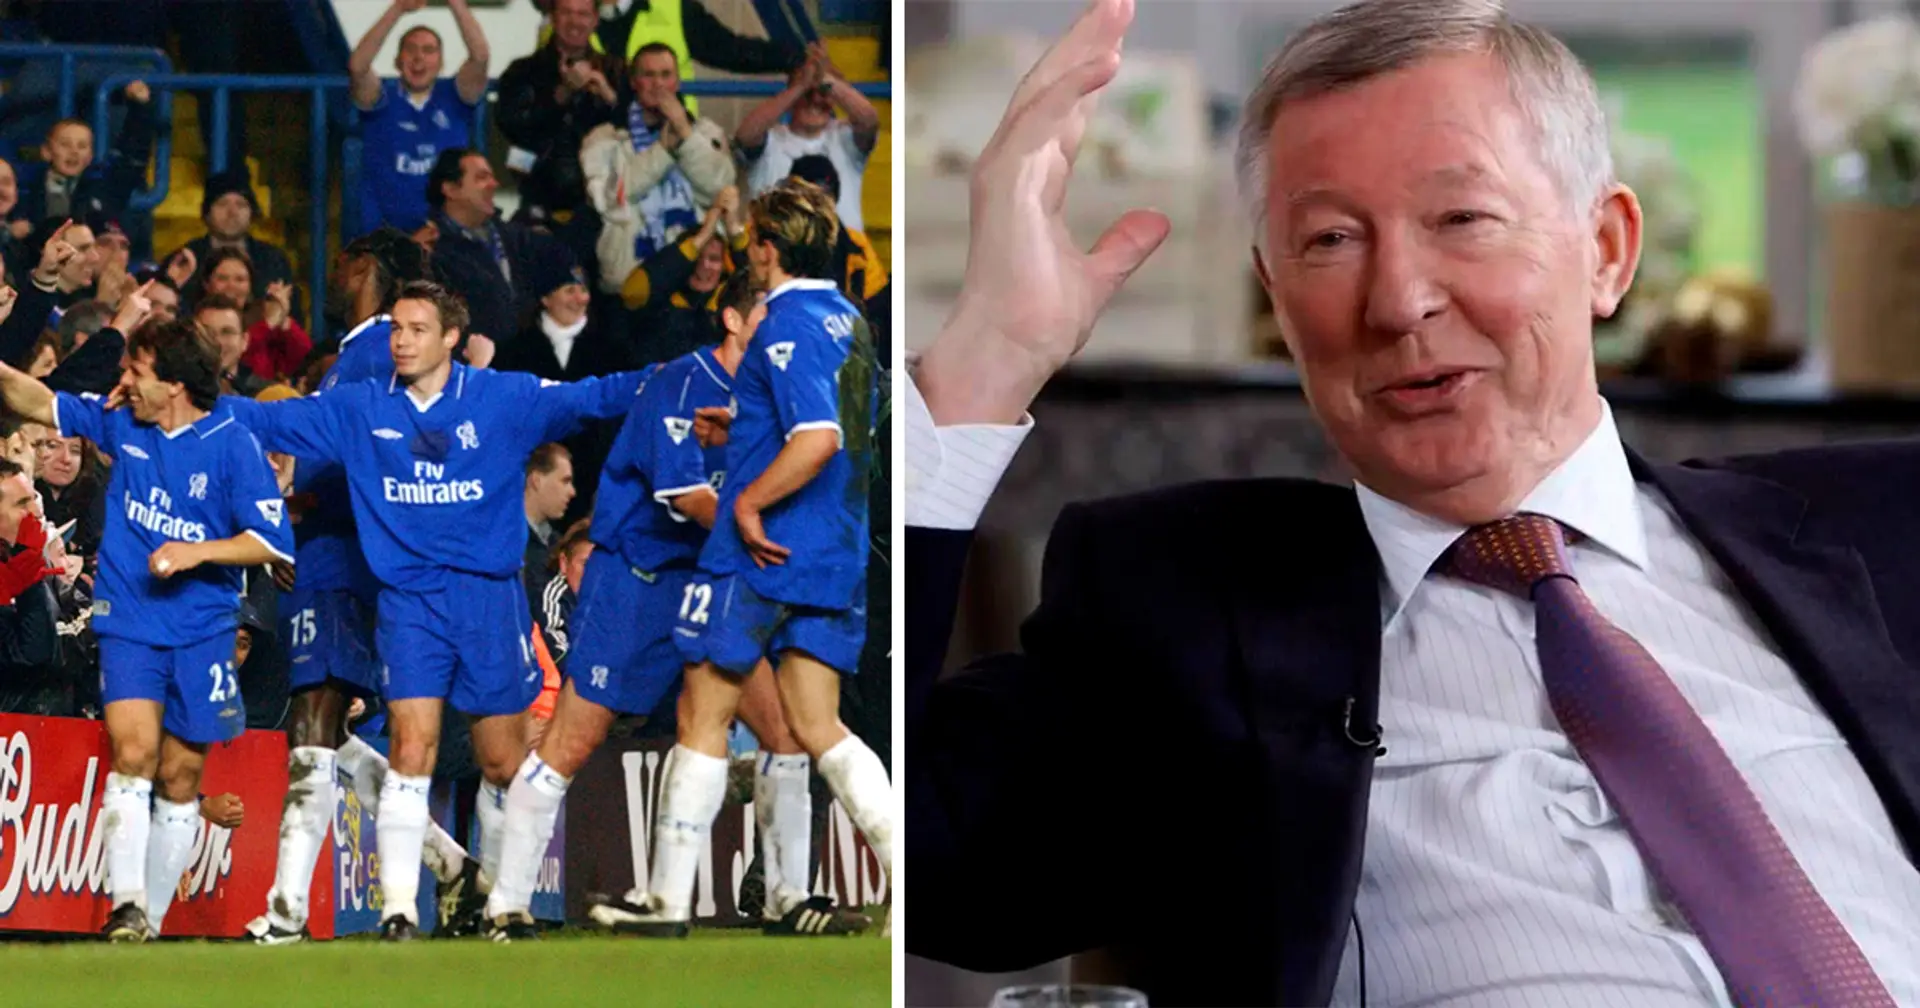 'He was fantastic': Sir Alex Ferguson names Chelsea star who constantly annoyed him during his playing career